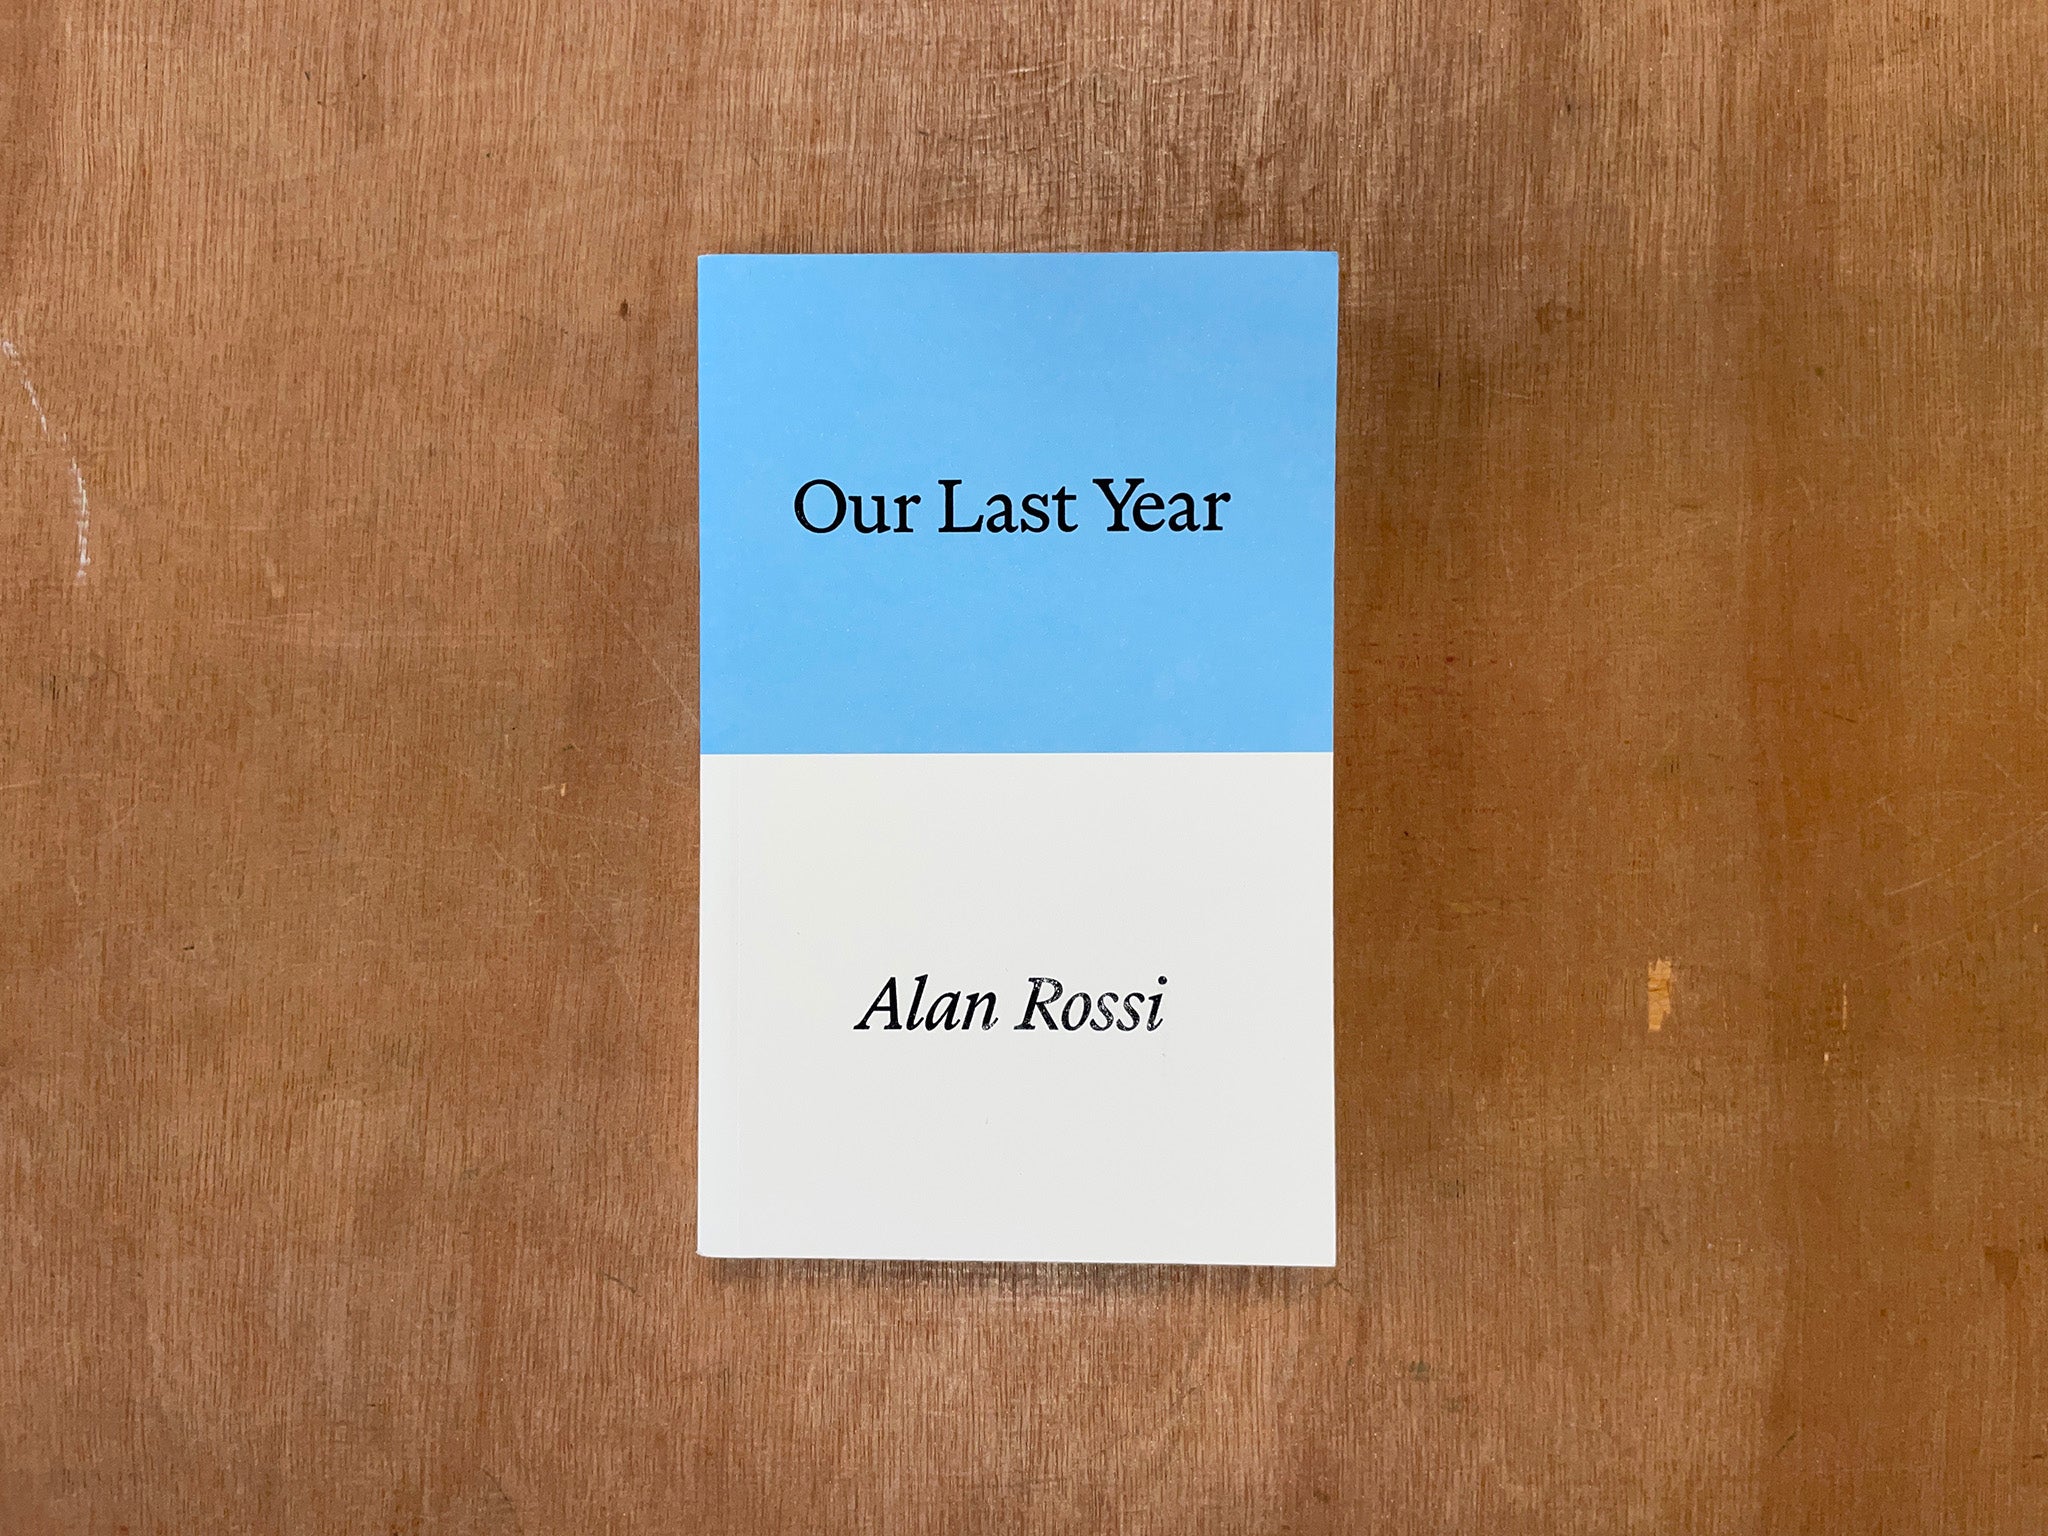 OUR LAST YEAR by Alan Rossi